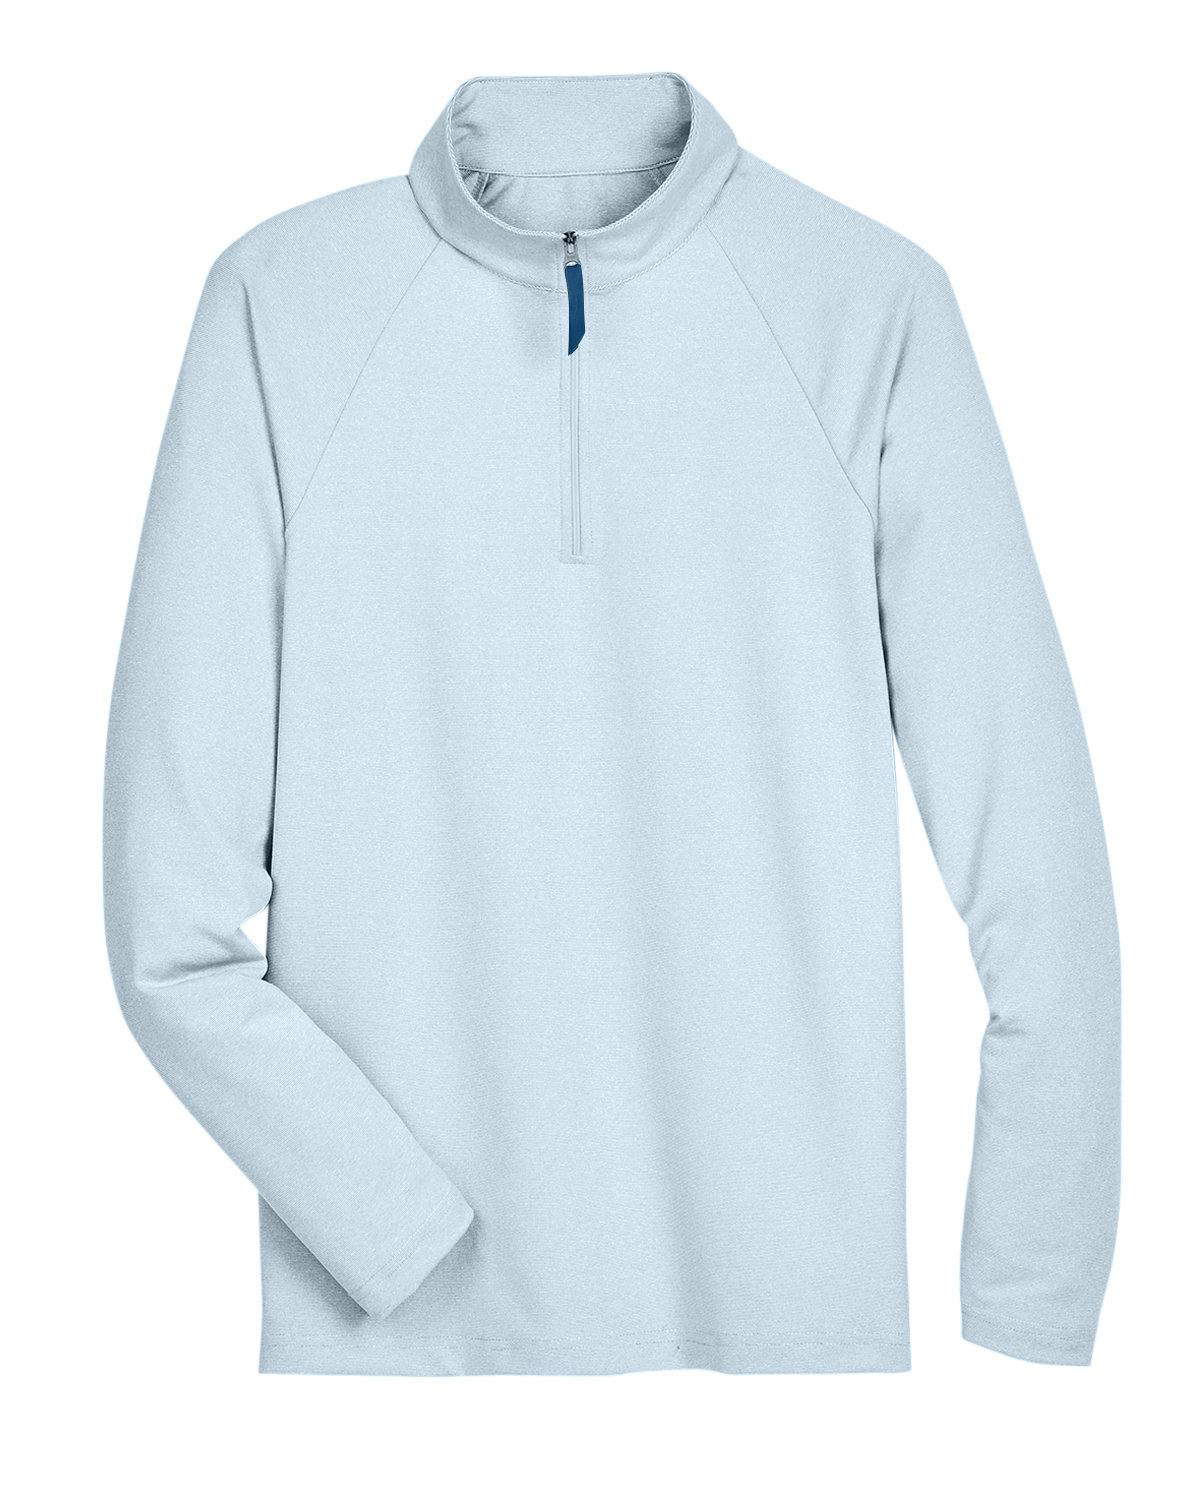 Image for CrownLux Performance® Men's Clubhouse Micro-Stripe Quarter-Zip